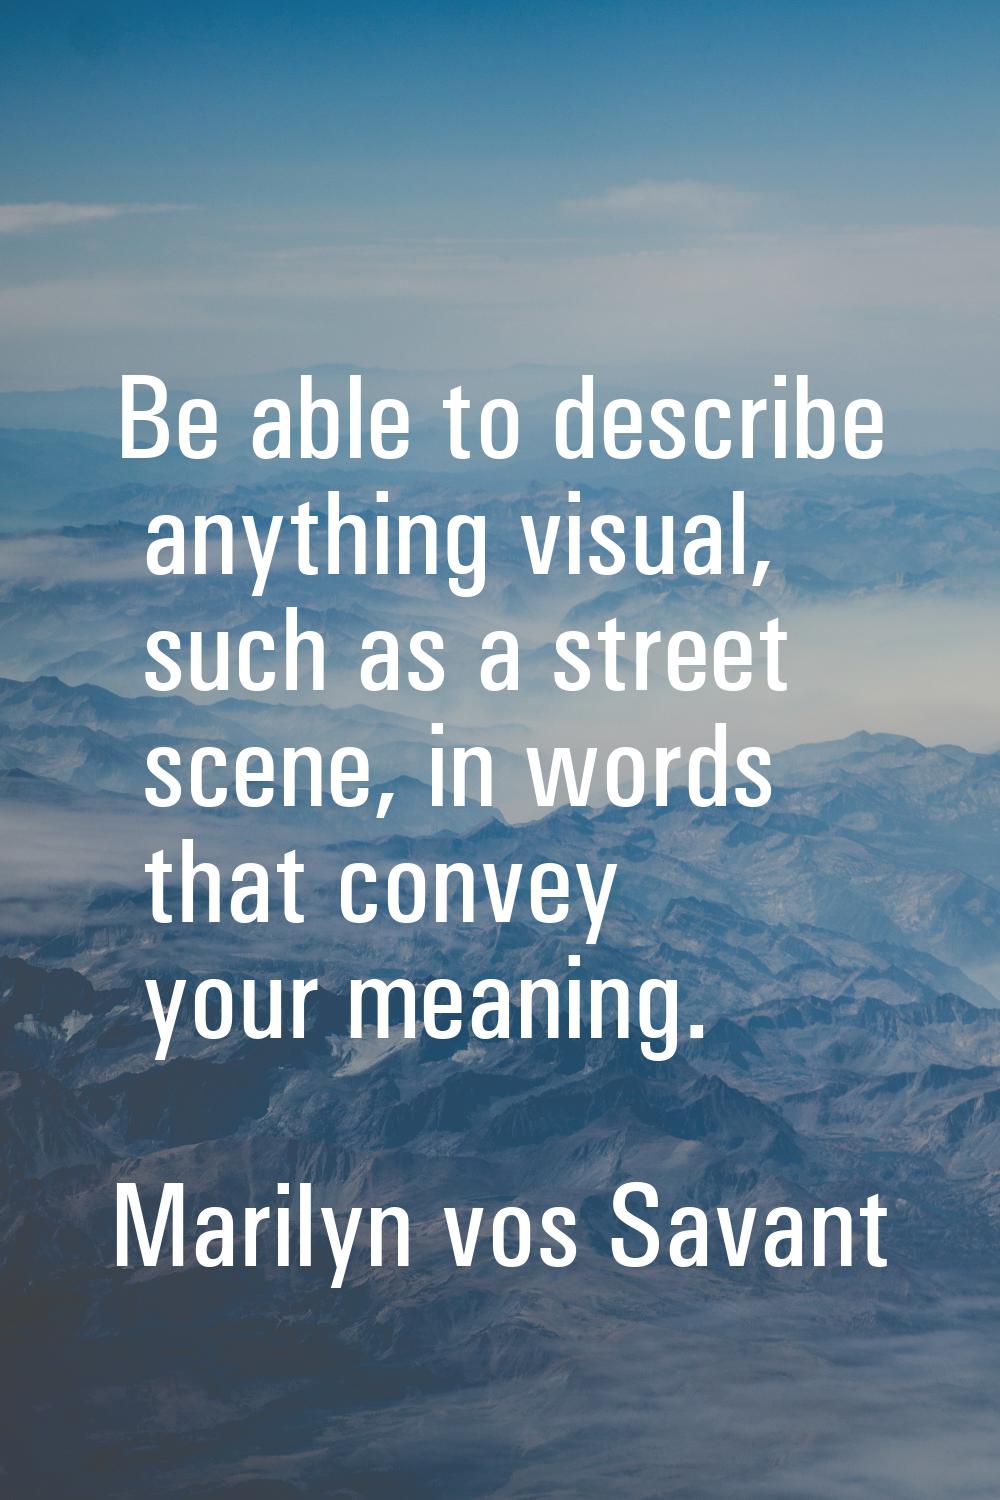 Be able to describe anything visual, such as a street scene, in words that convey your meaning.